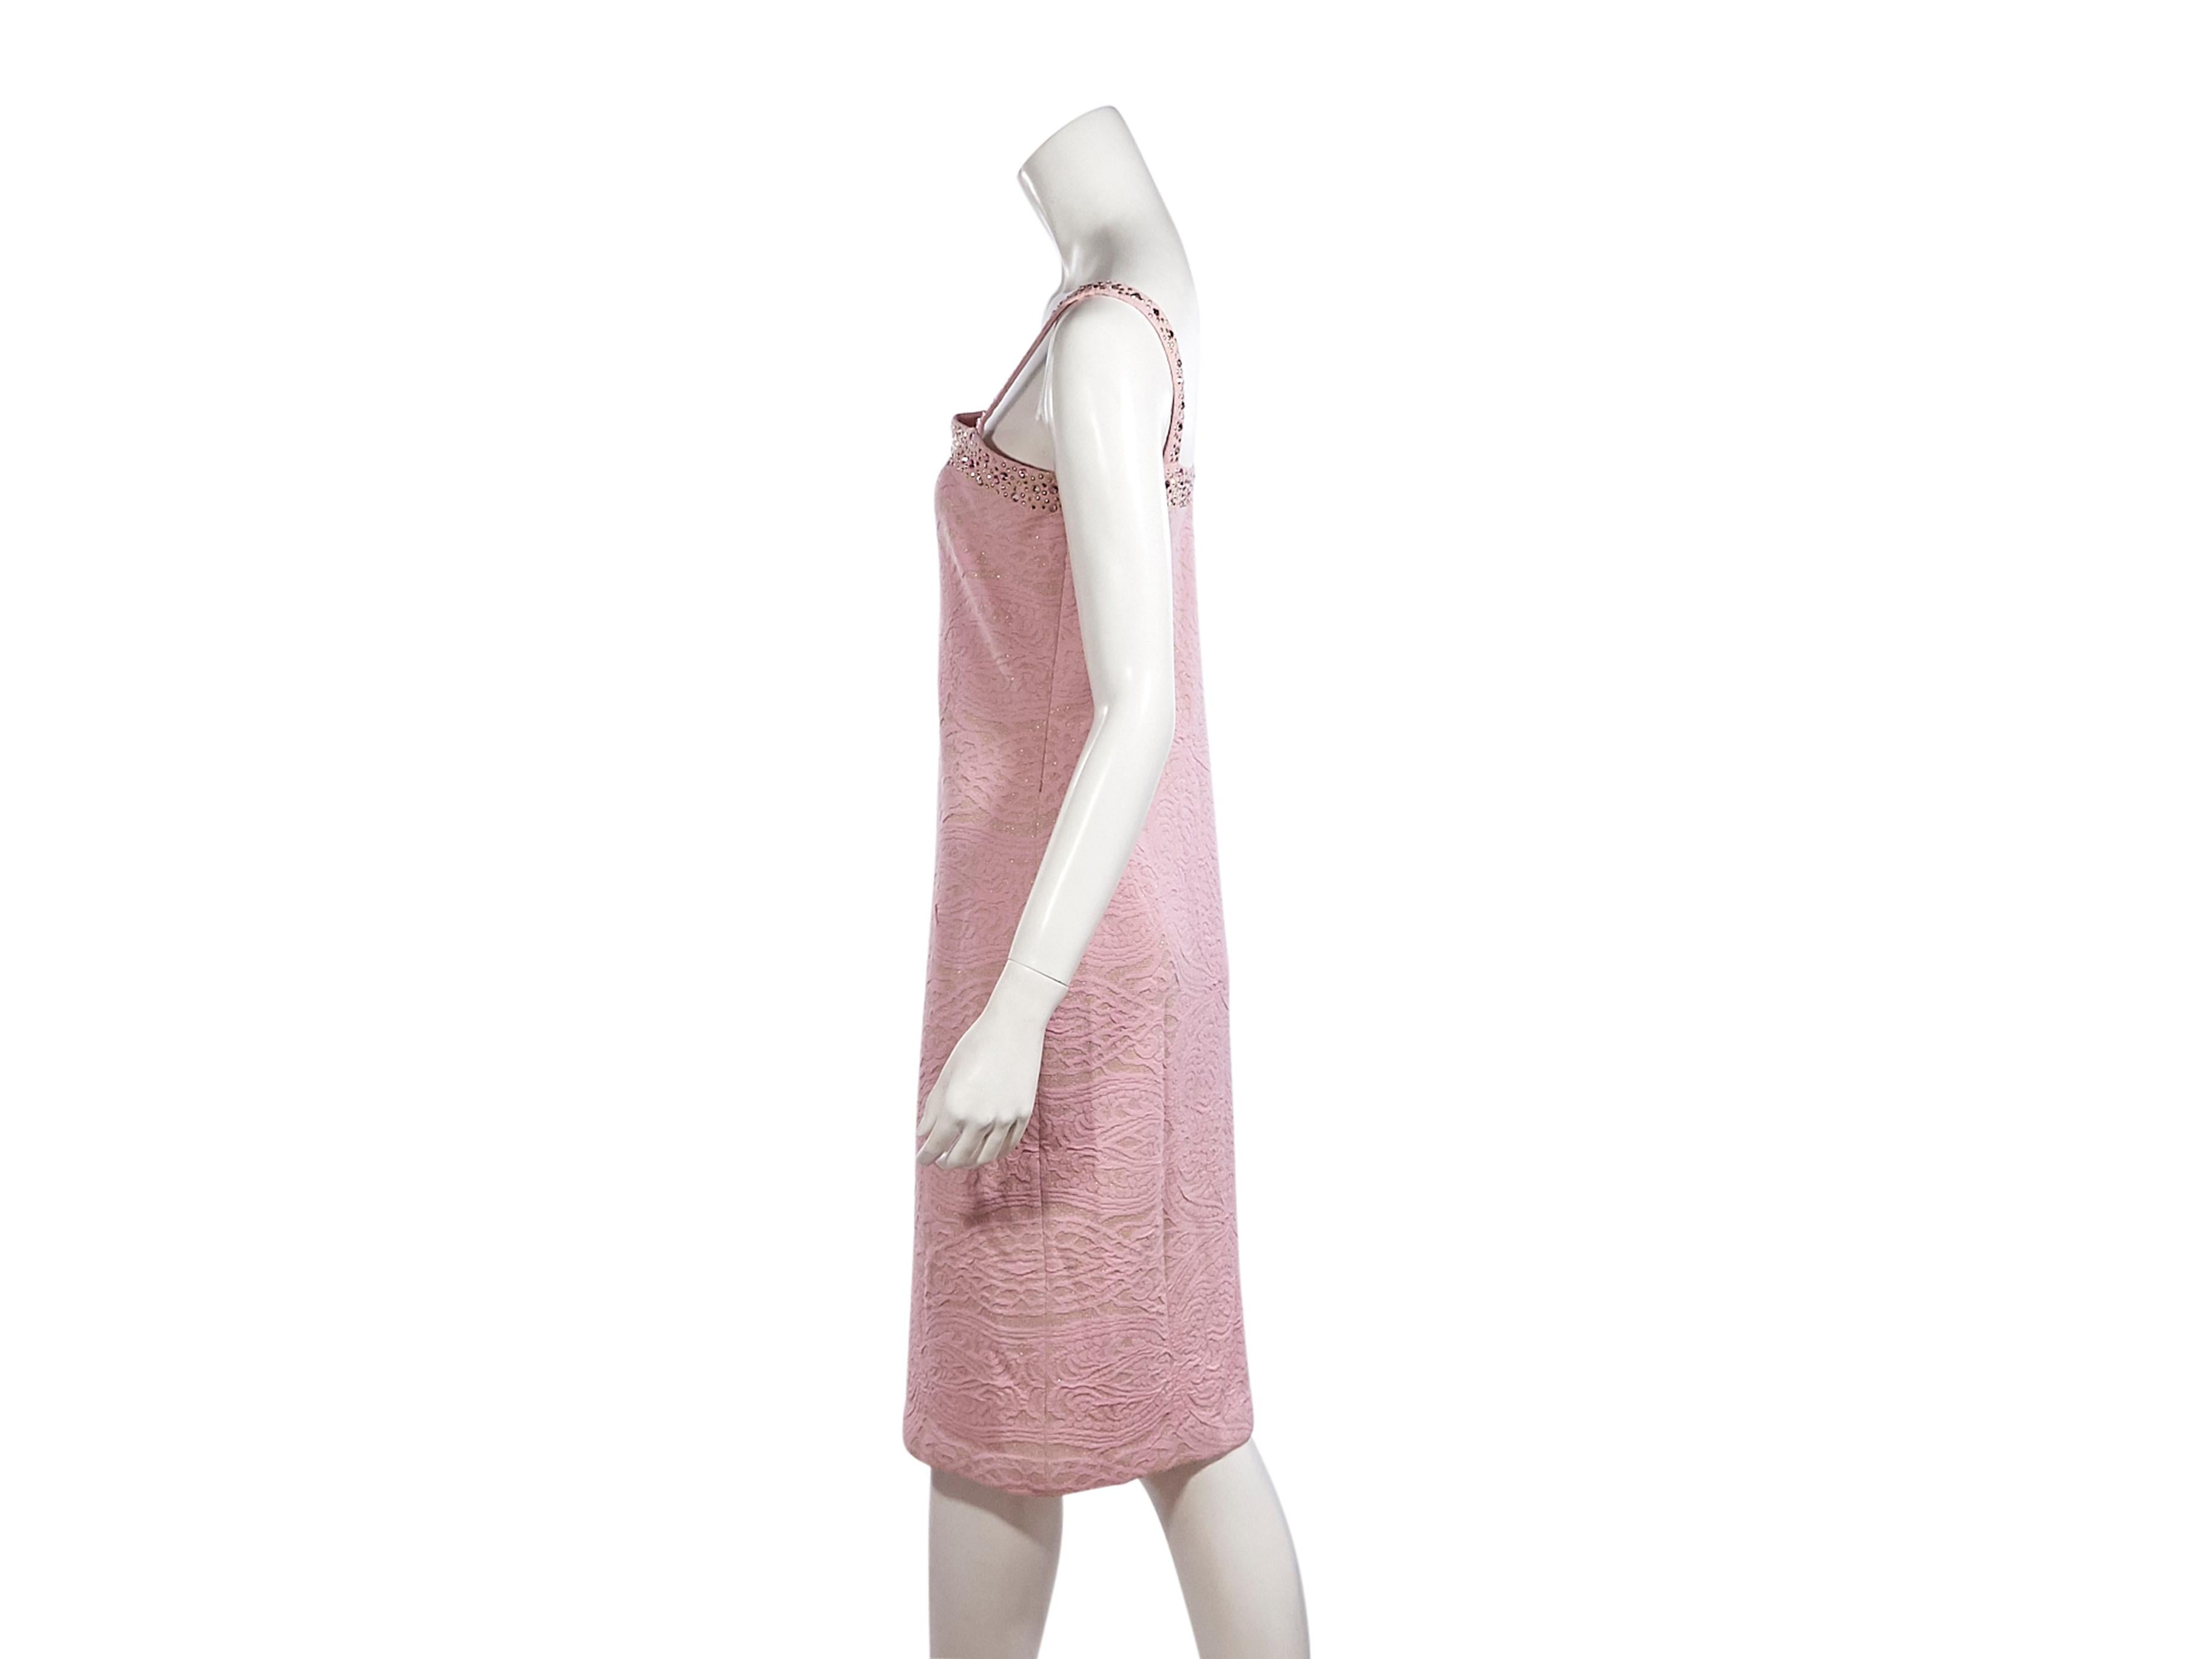 Product details:  Metallic pink floral sheath dress by St. John.  Embellished with crystals.  Sleeveless.  36